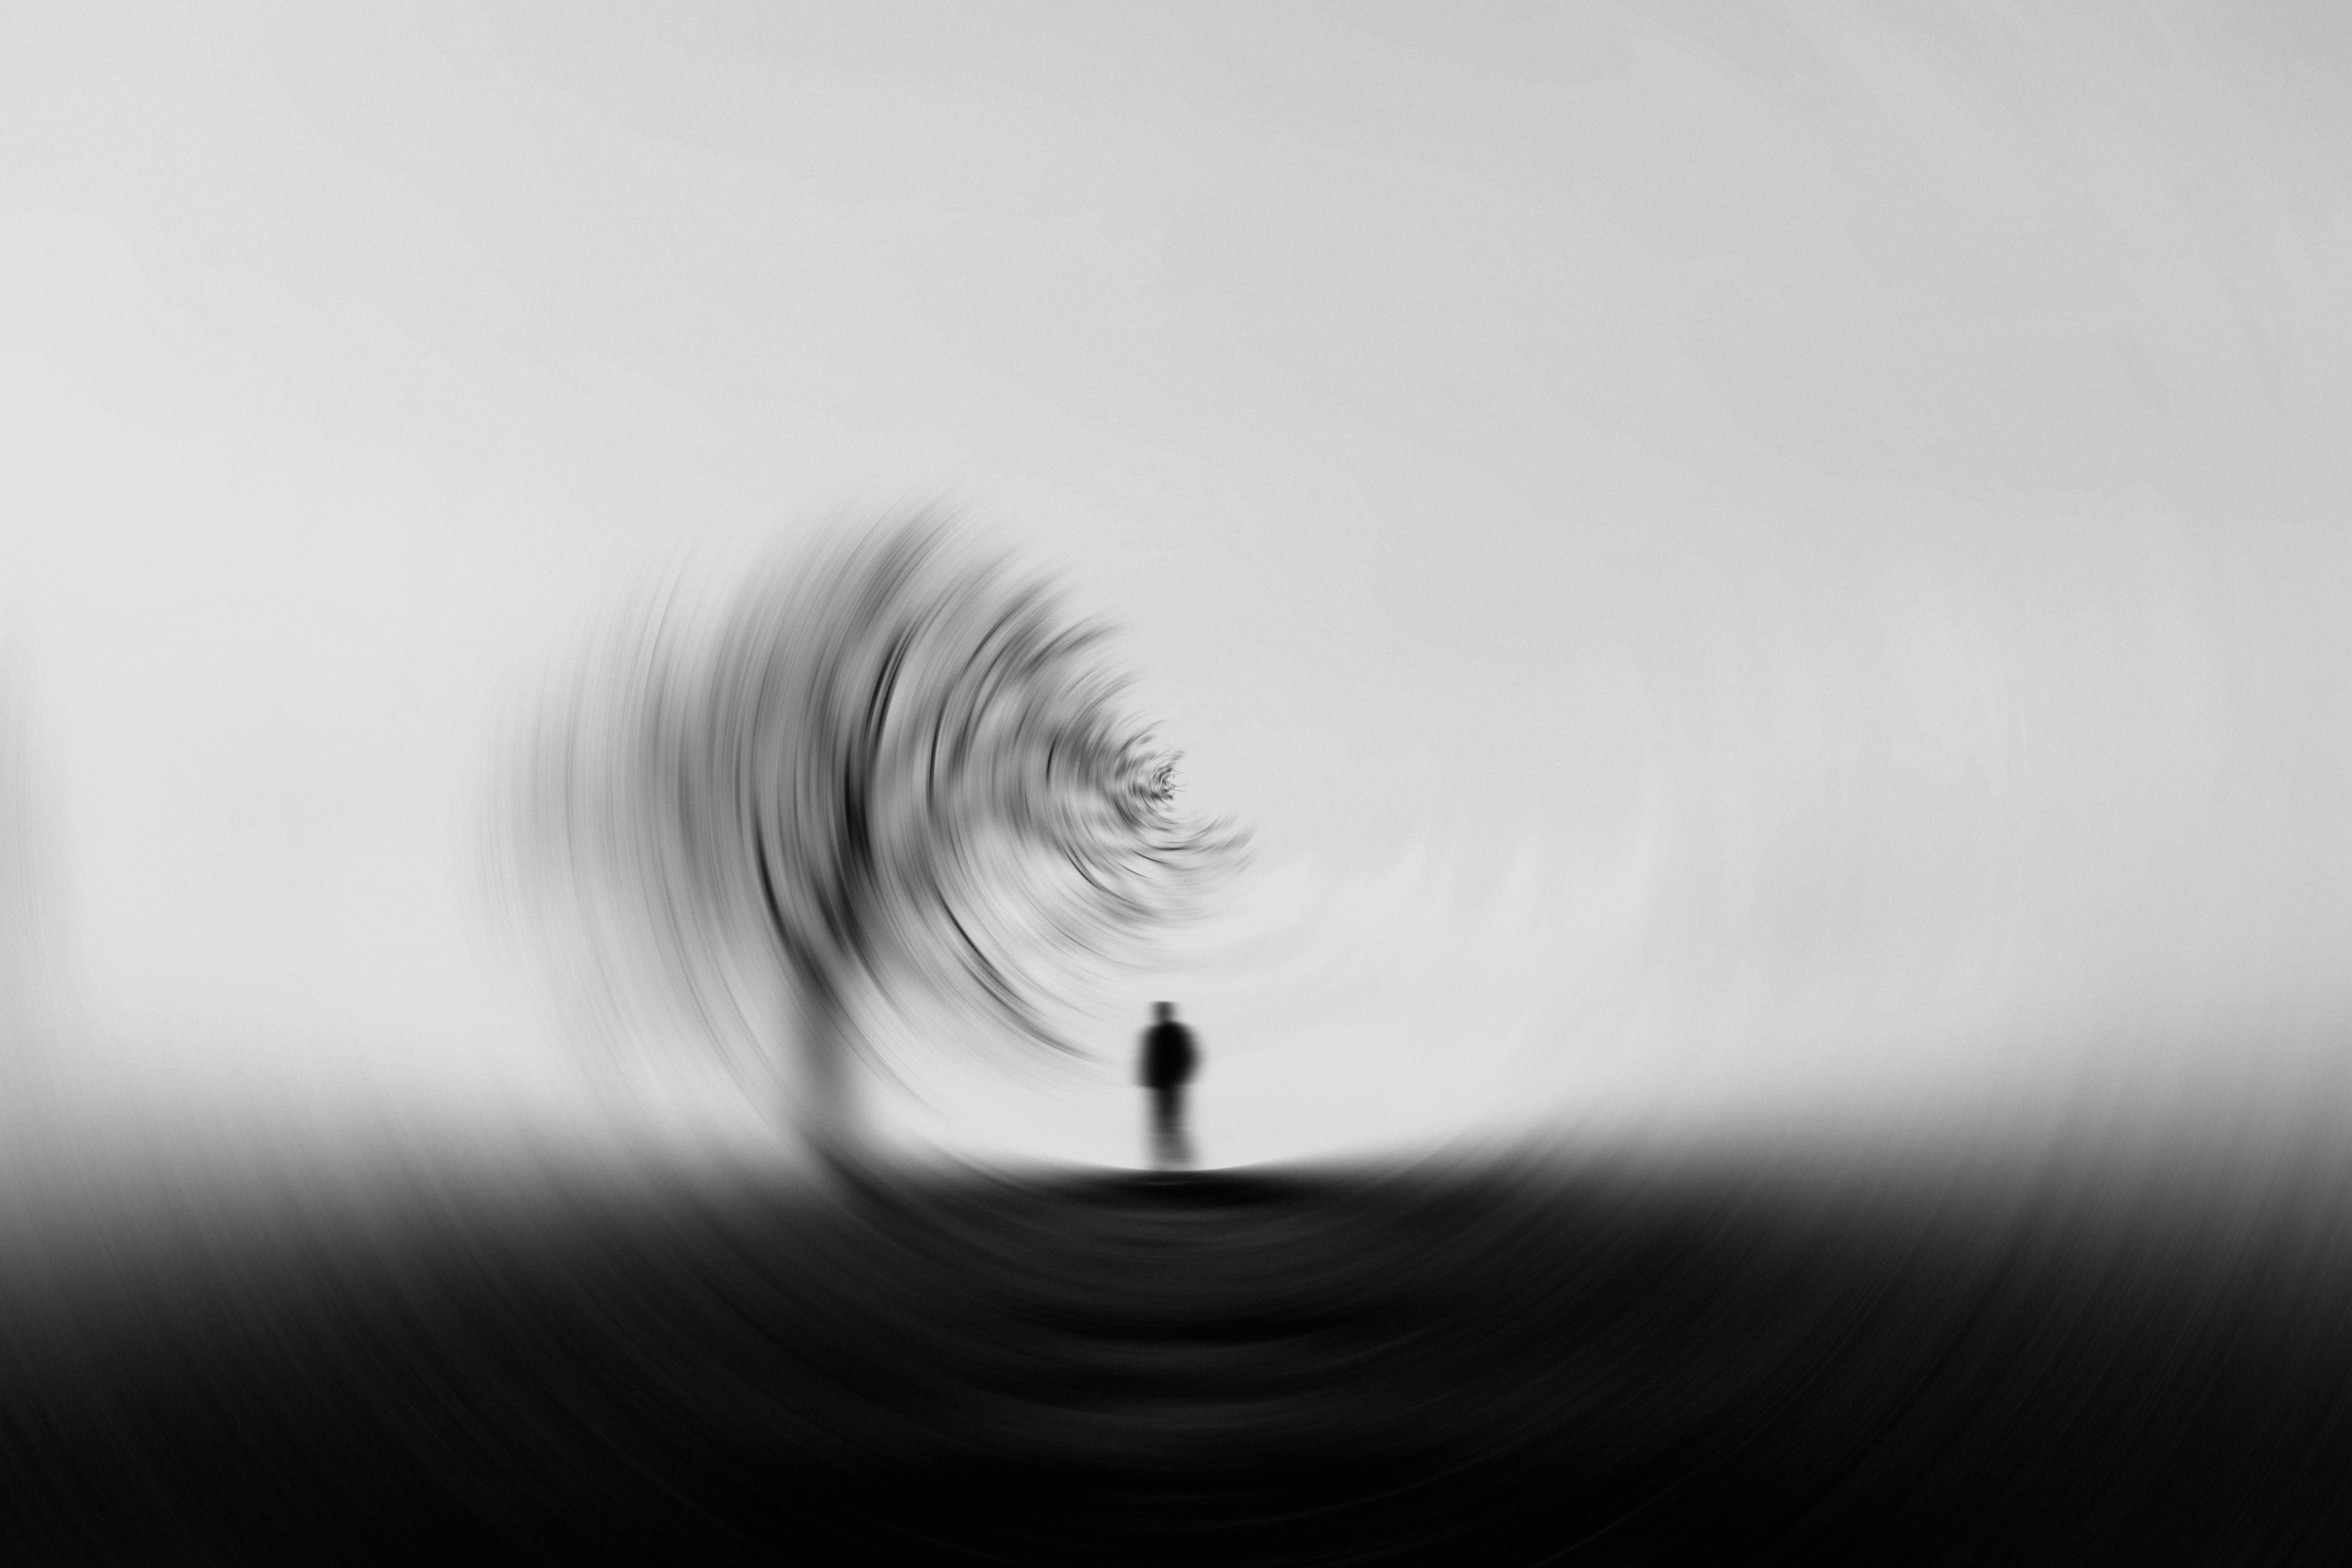 wallpapers bw, chb, silhouette, smooth, blur, miscellanea, miscellaneous, wood, tree, effect